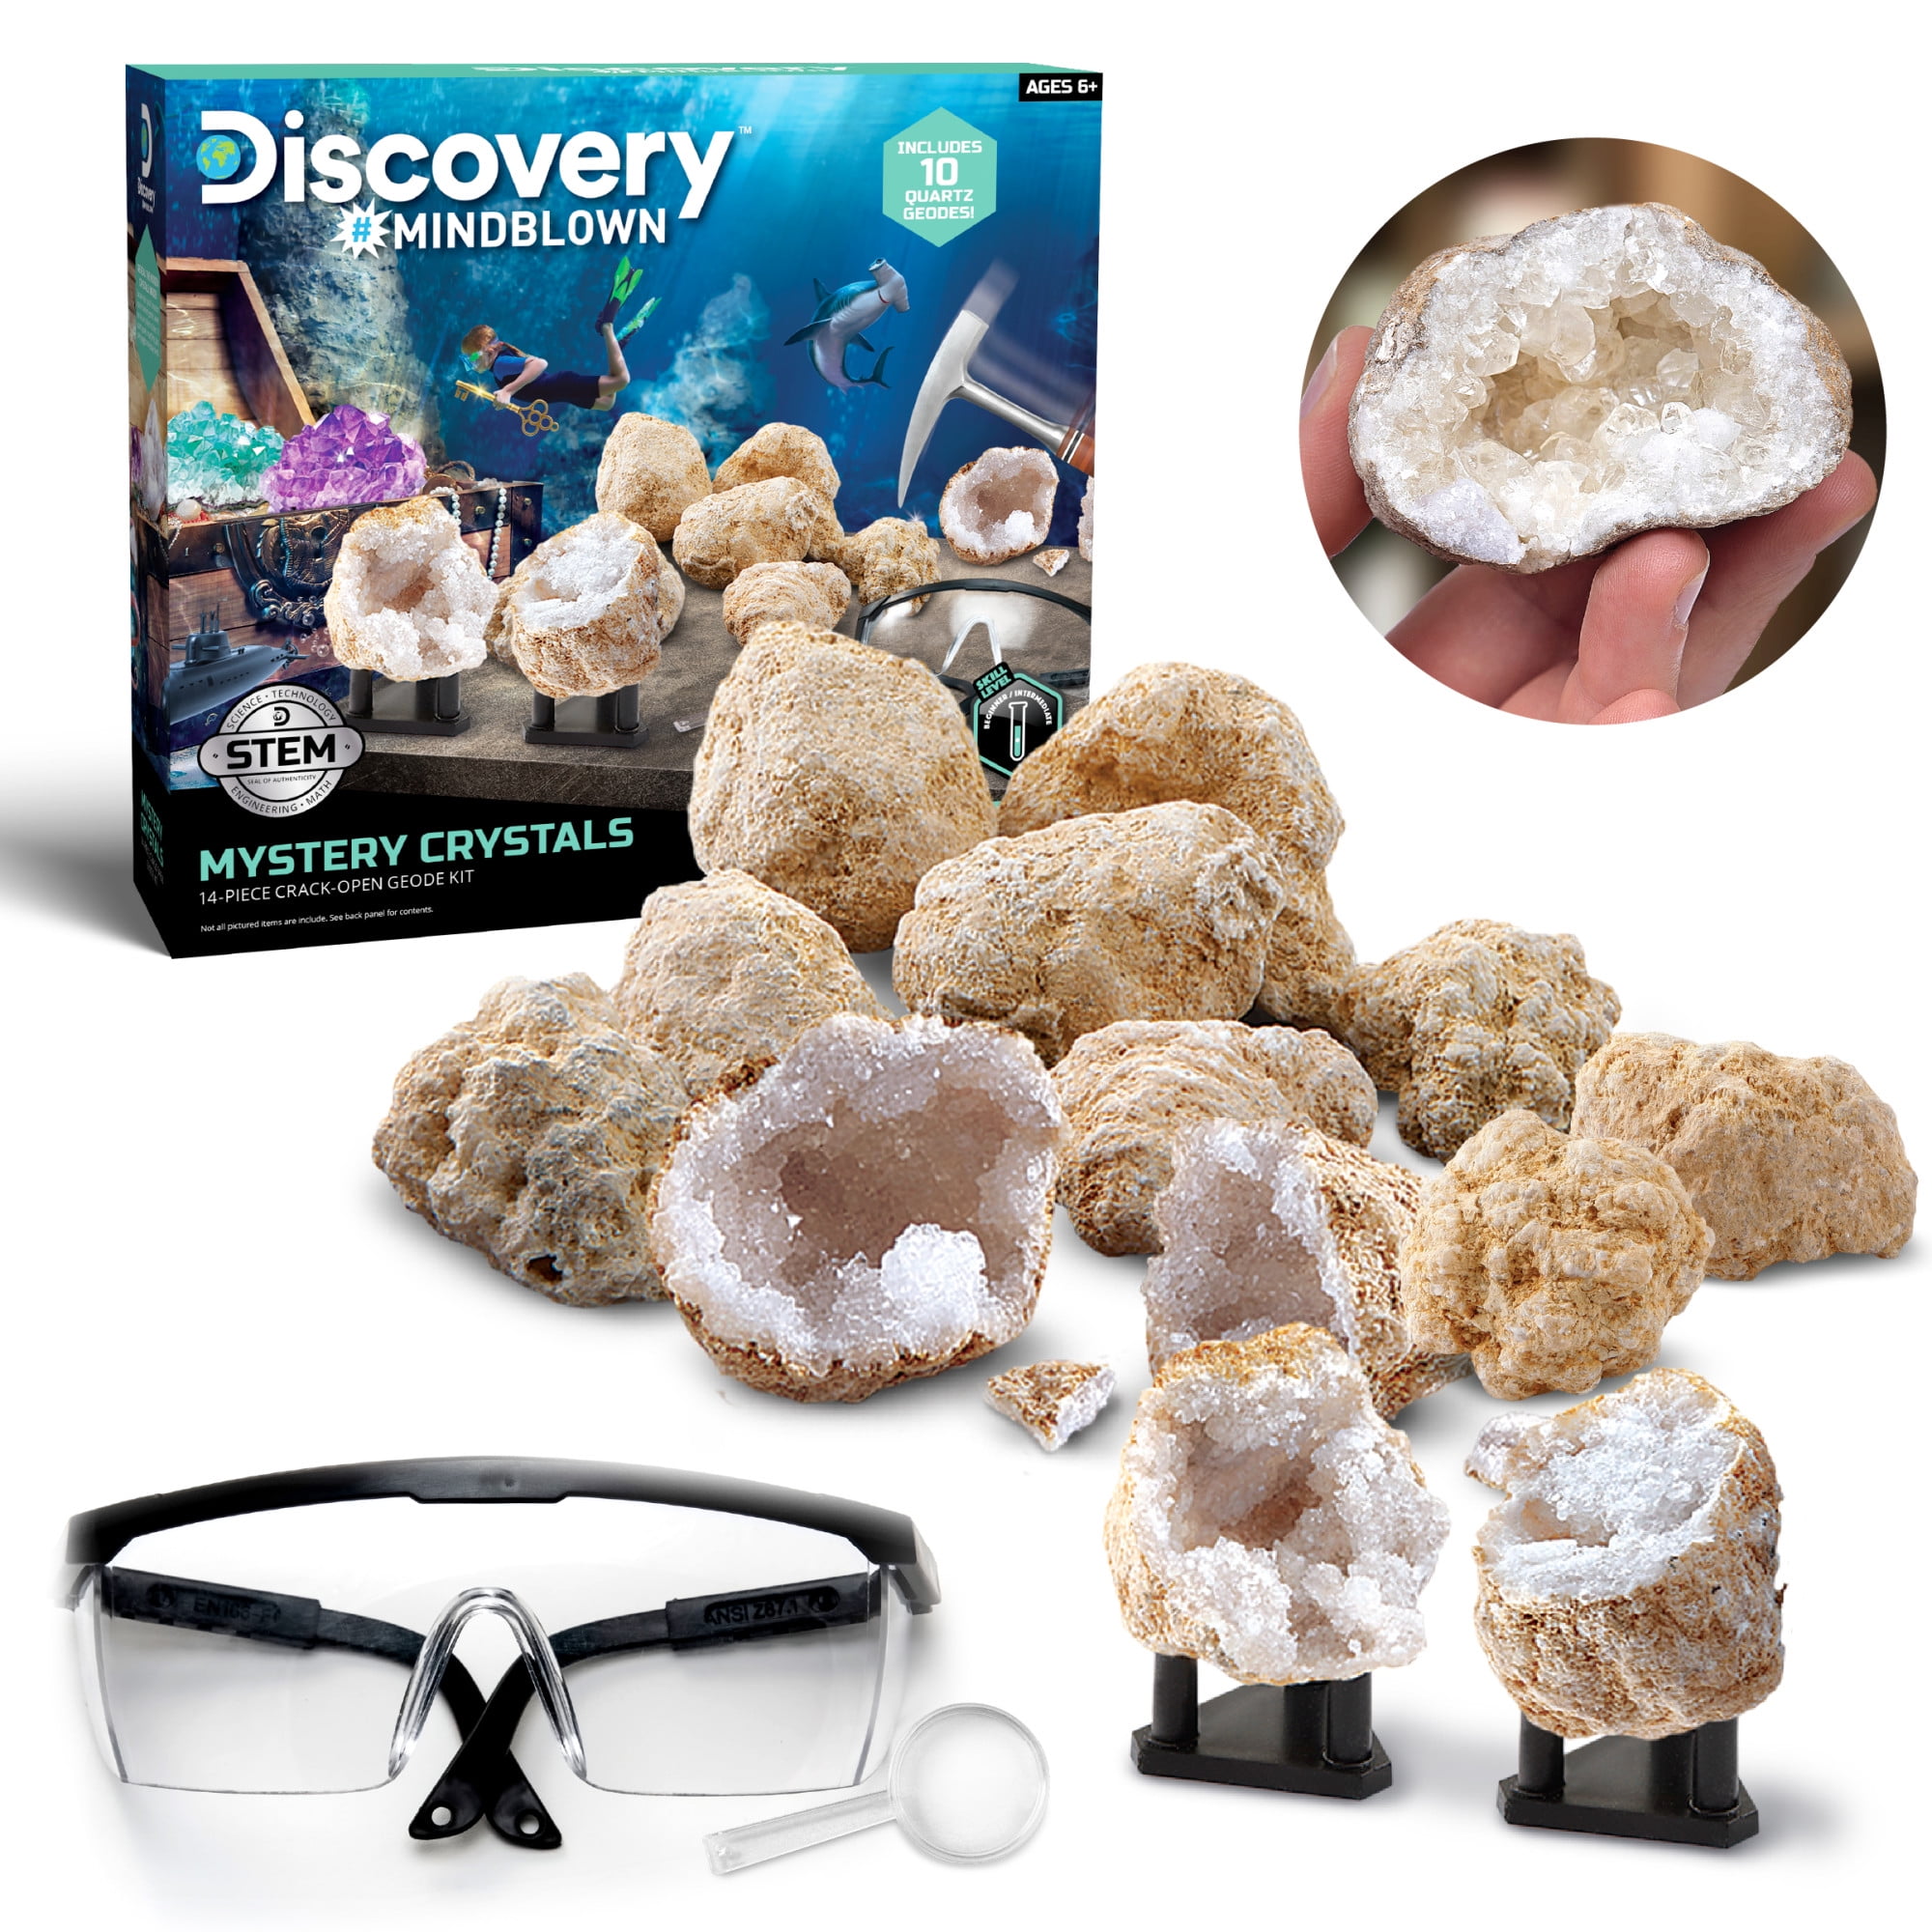 Discovery #MINDBLOWN Discovery™ #Mindblown Geode Crystal Excavation Kit, 14-Piece Geology STEM Set, Discover Hidden Crystals, Includes 10 Geodes 2 Display Stands Goggles and Tools, Gifts For Ages 6 and Up